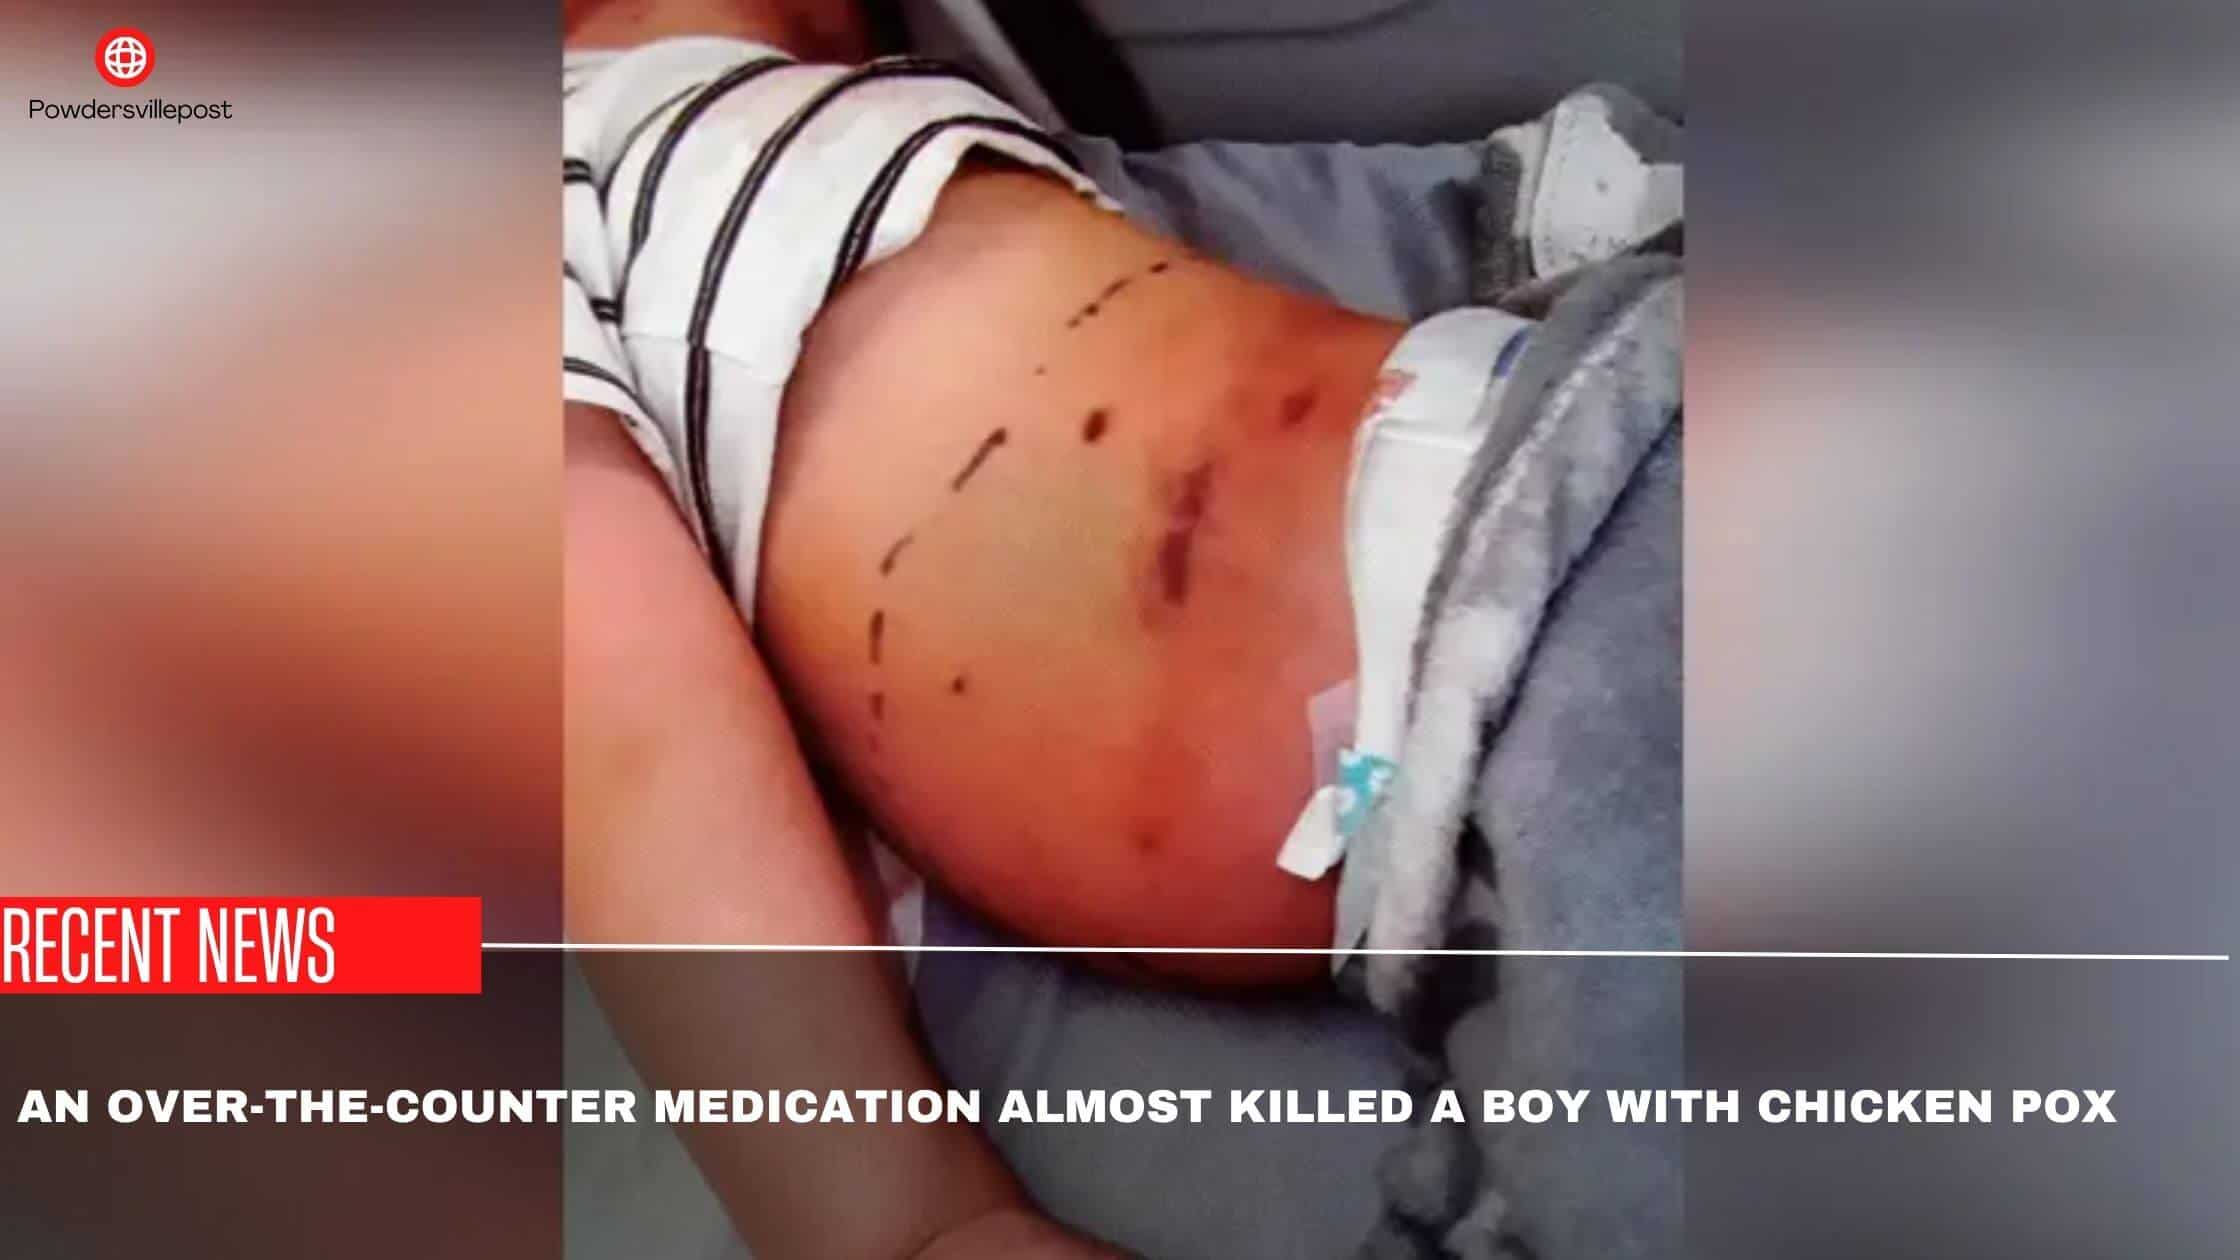 An Over-The-Counter Medication Almost Killed A Boy With Chicken Pox